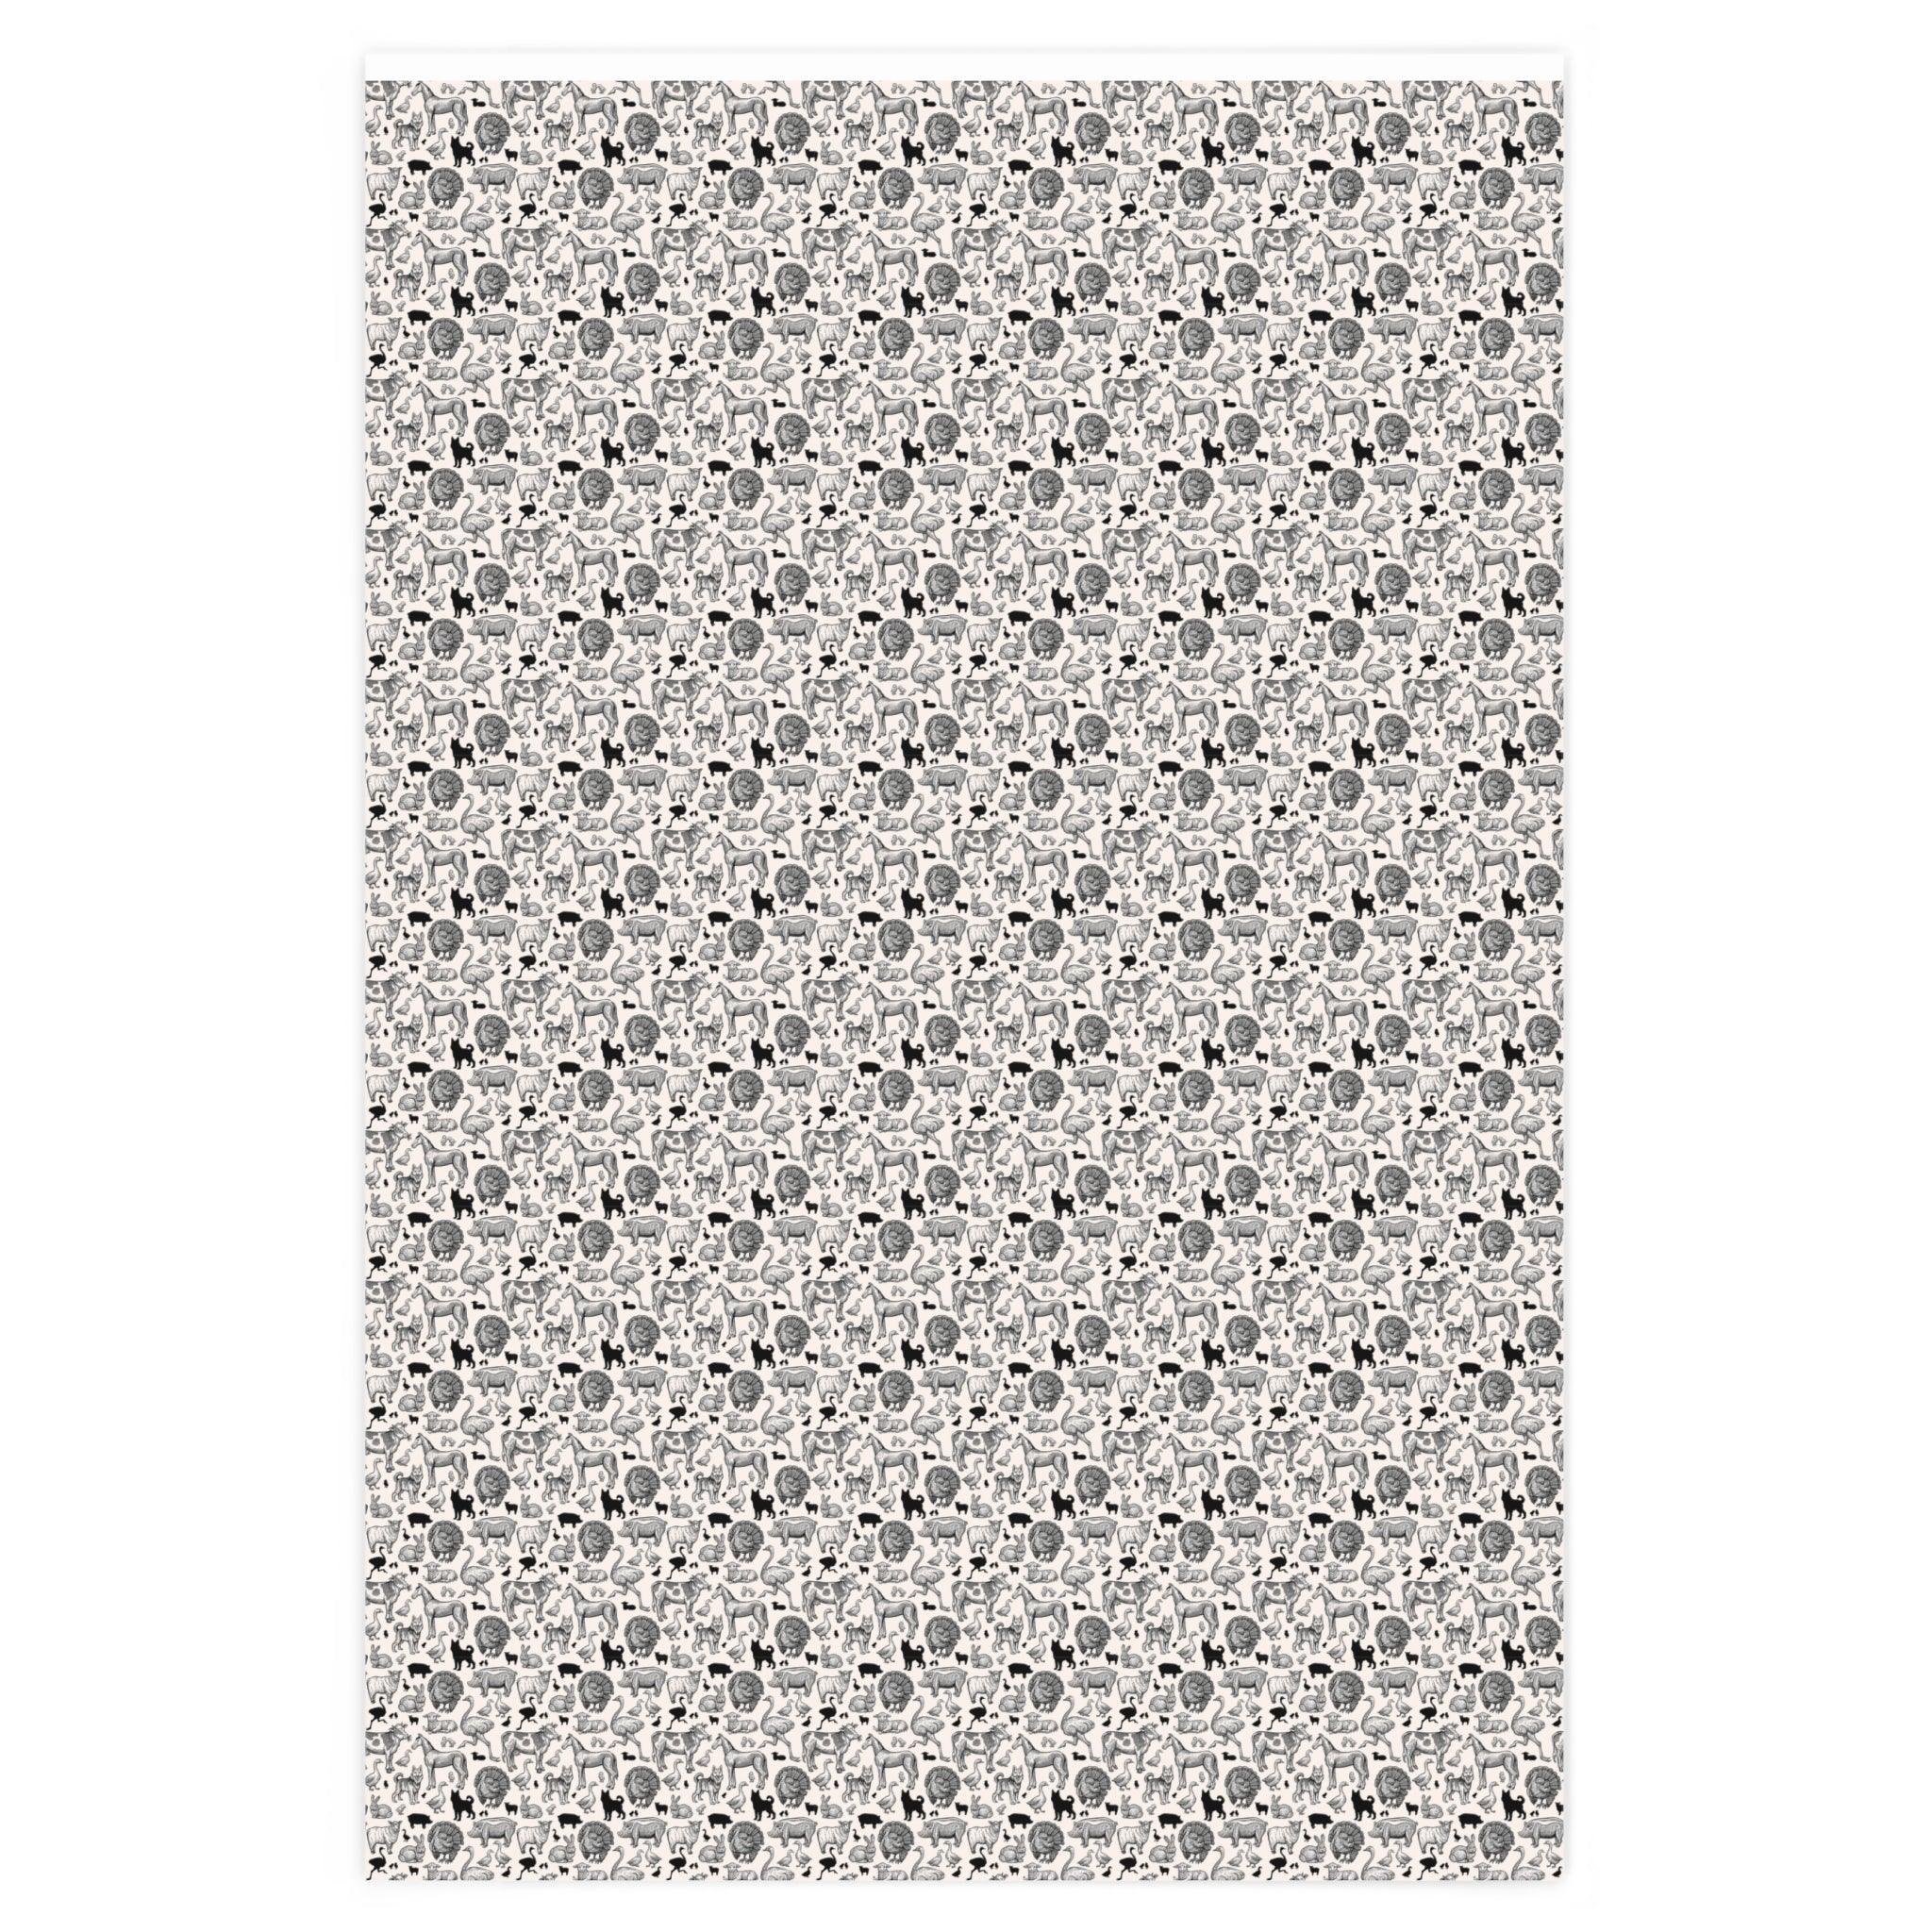 Wrapping Paper -Farm Animals - Elementologie